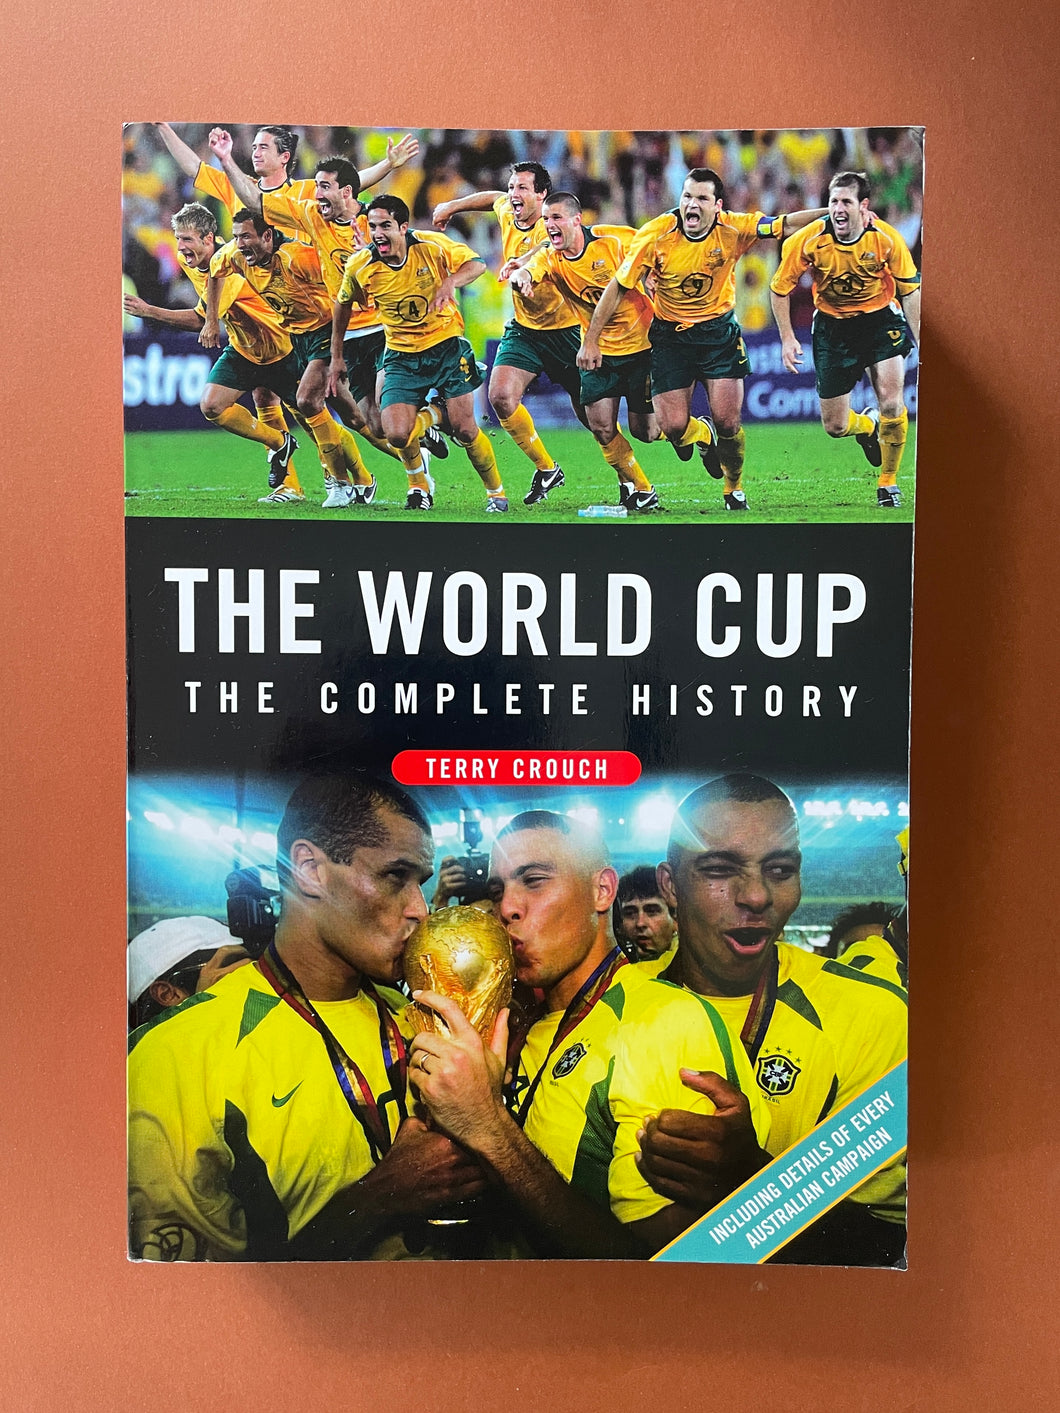 The World Cup-The Complete History by Terry Crouch: photo of the front cover which shows very minor scuff marks and creasing.